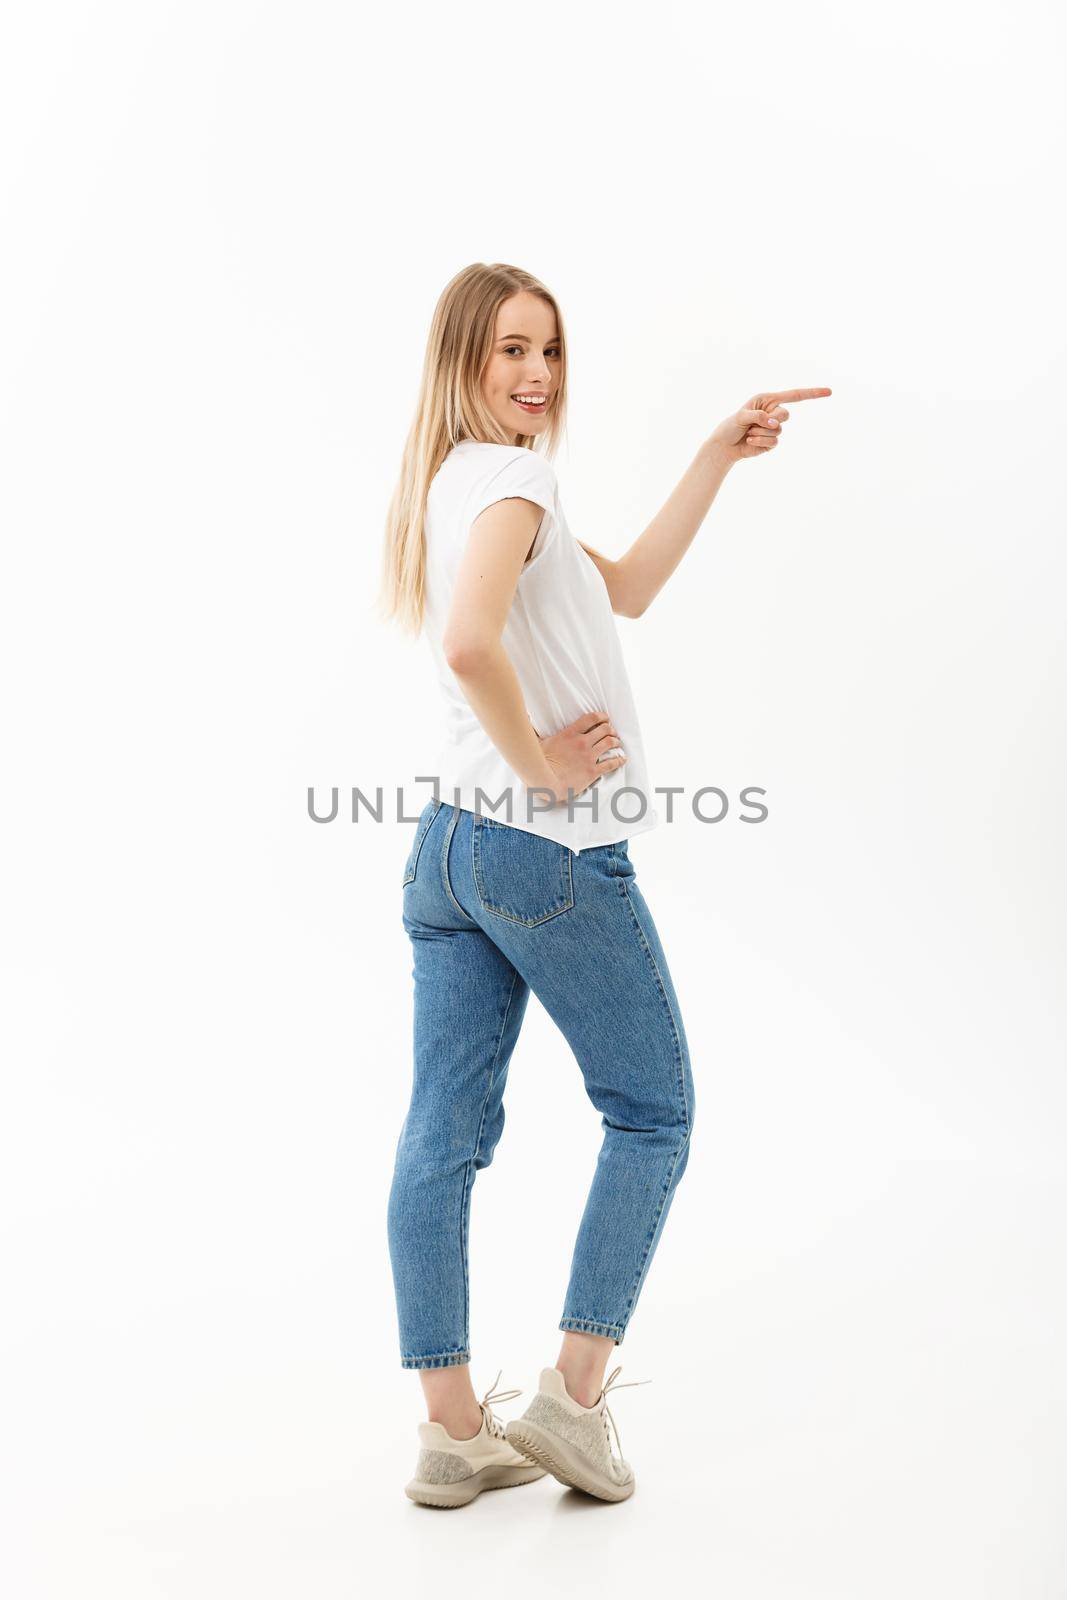 Lifestyle Concept: Portrait woman pointing or pushing something with index finger. Beautiful casual young woman isolated on white background in full length standing in profile